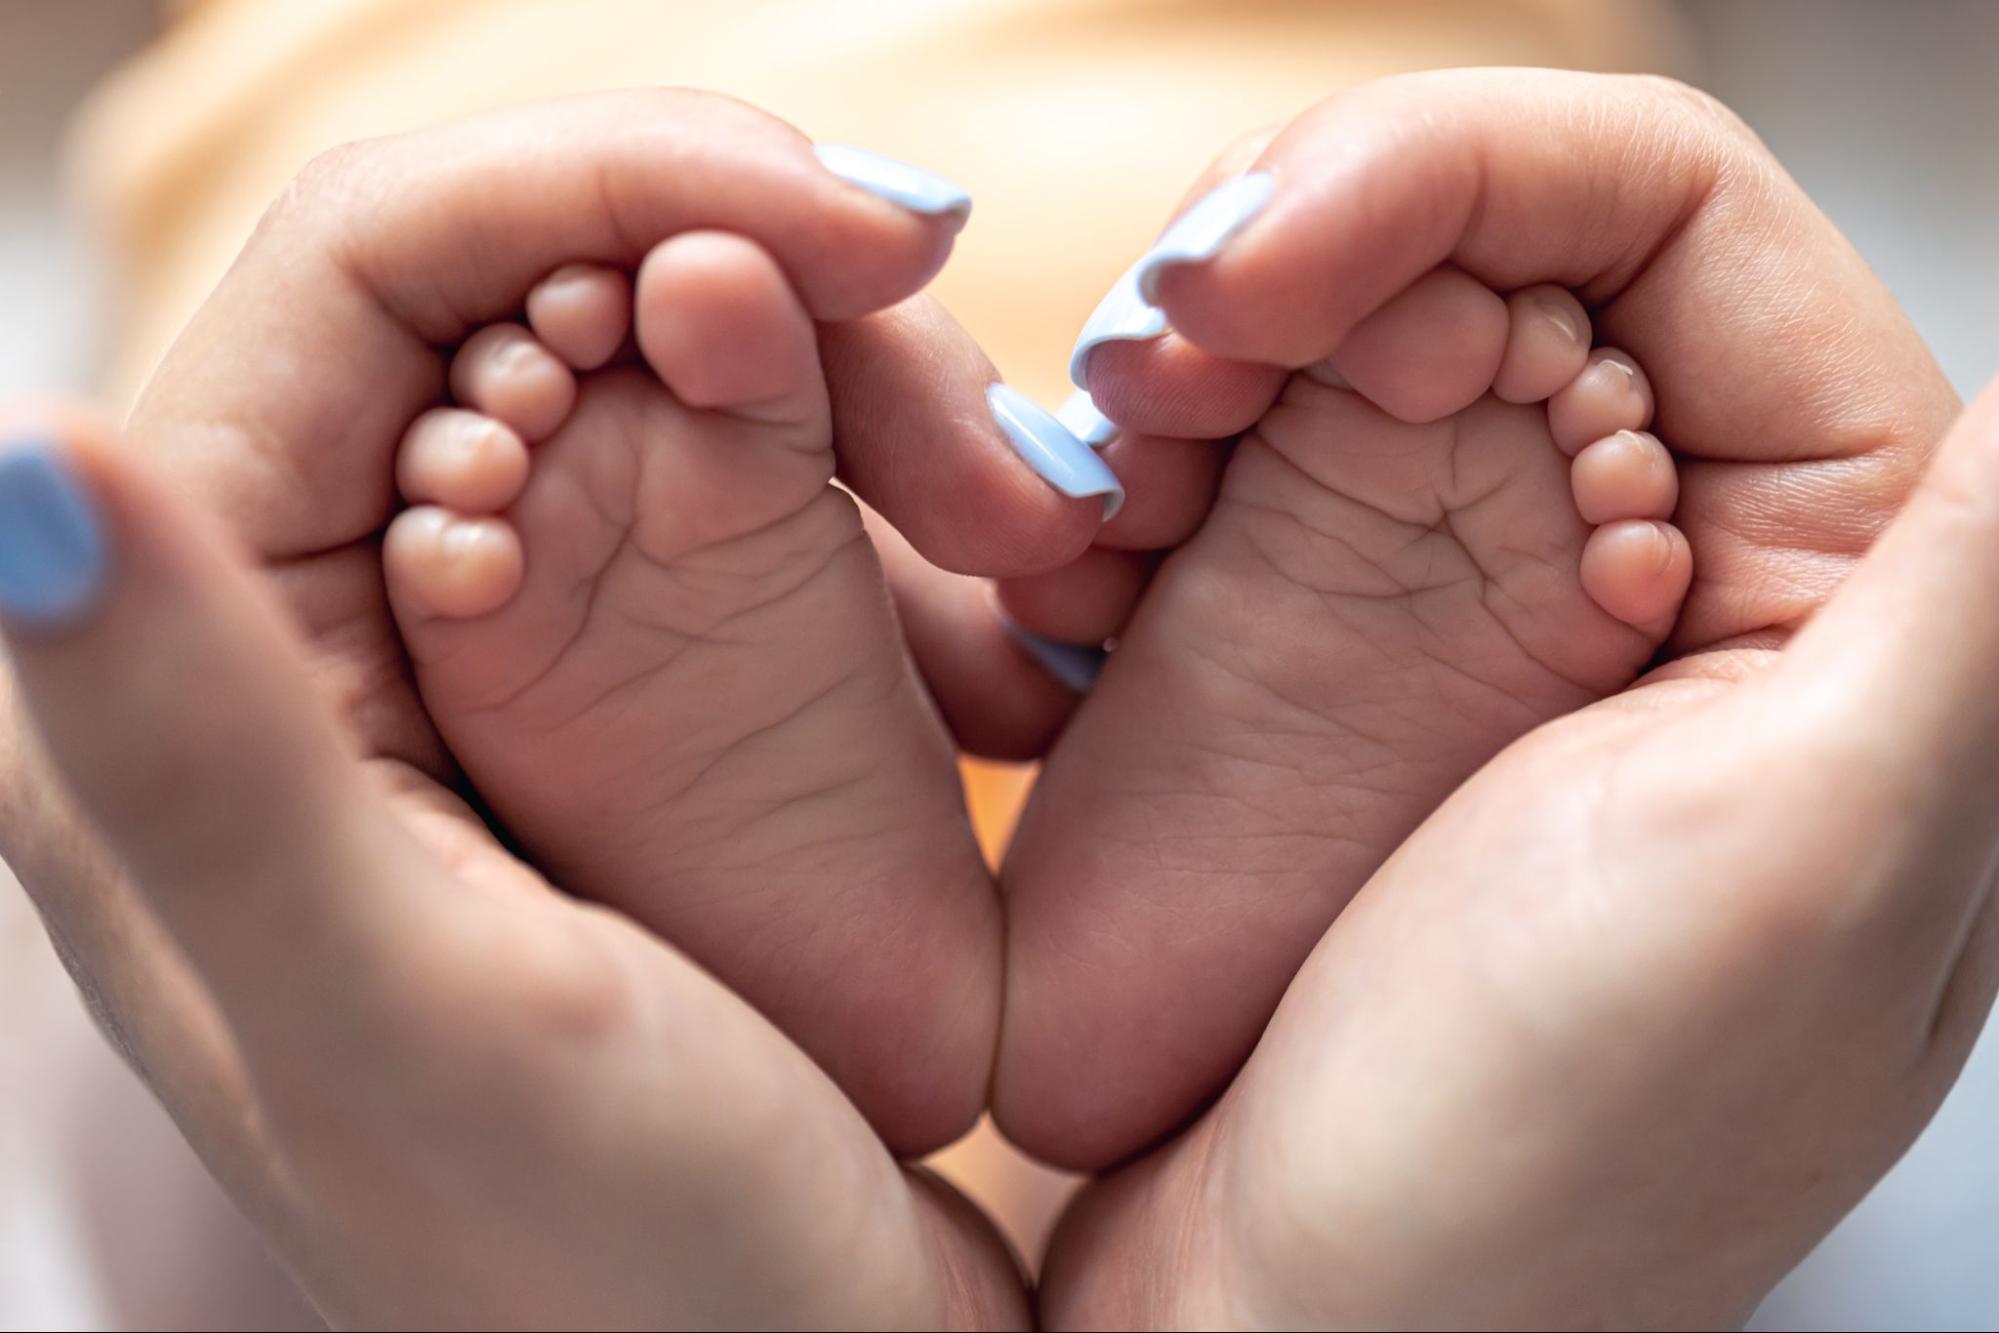 Tiny baby feet cradled in hands, a sweet baby shower gift idea for a keepsake